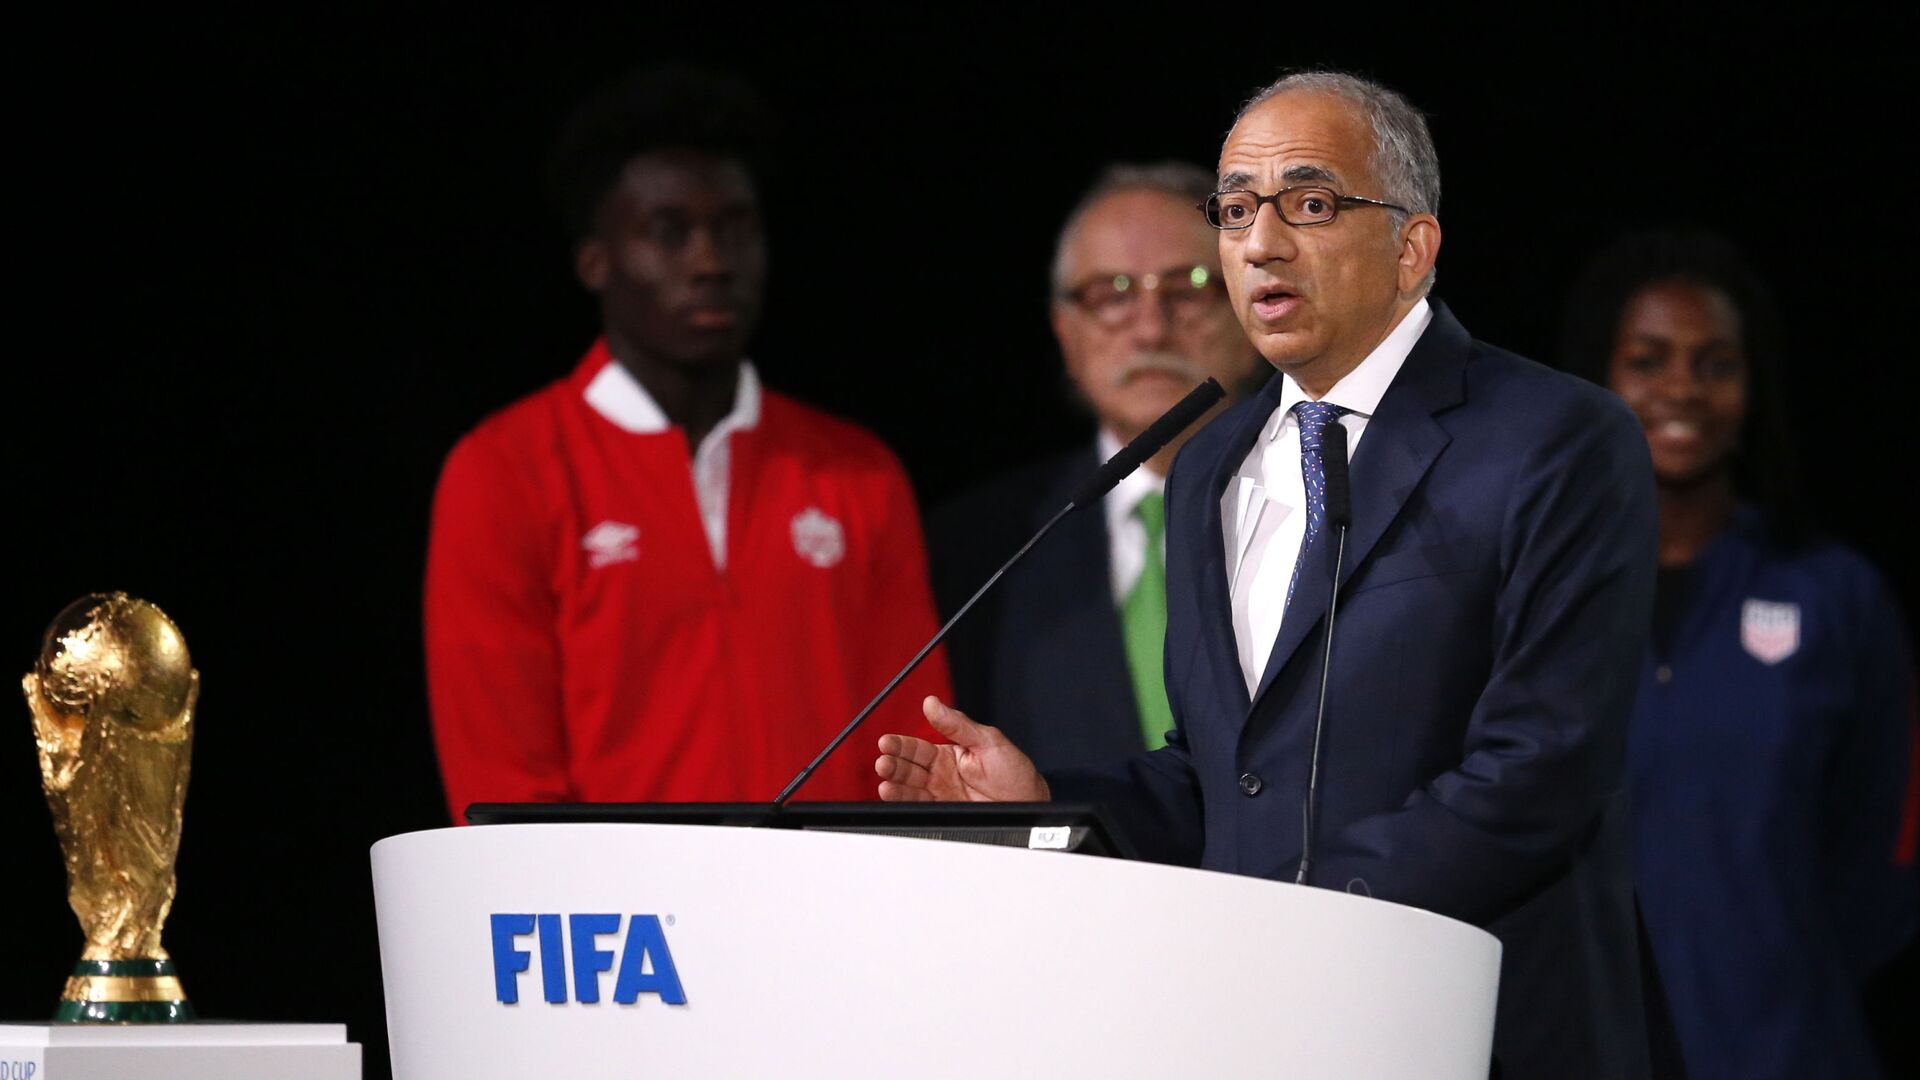 Carlos Cordeiro, the president of the United States Soccer Federation speaks at the FIFA congress on the eve of the opener of the 2018 soccer World Cup in Moscow - اسپوتنیک افغانستان  , 1920, 04.03.2022